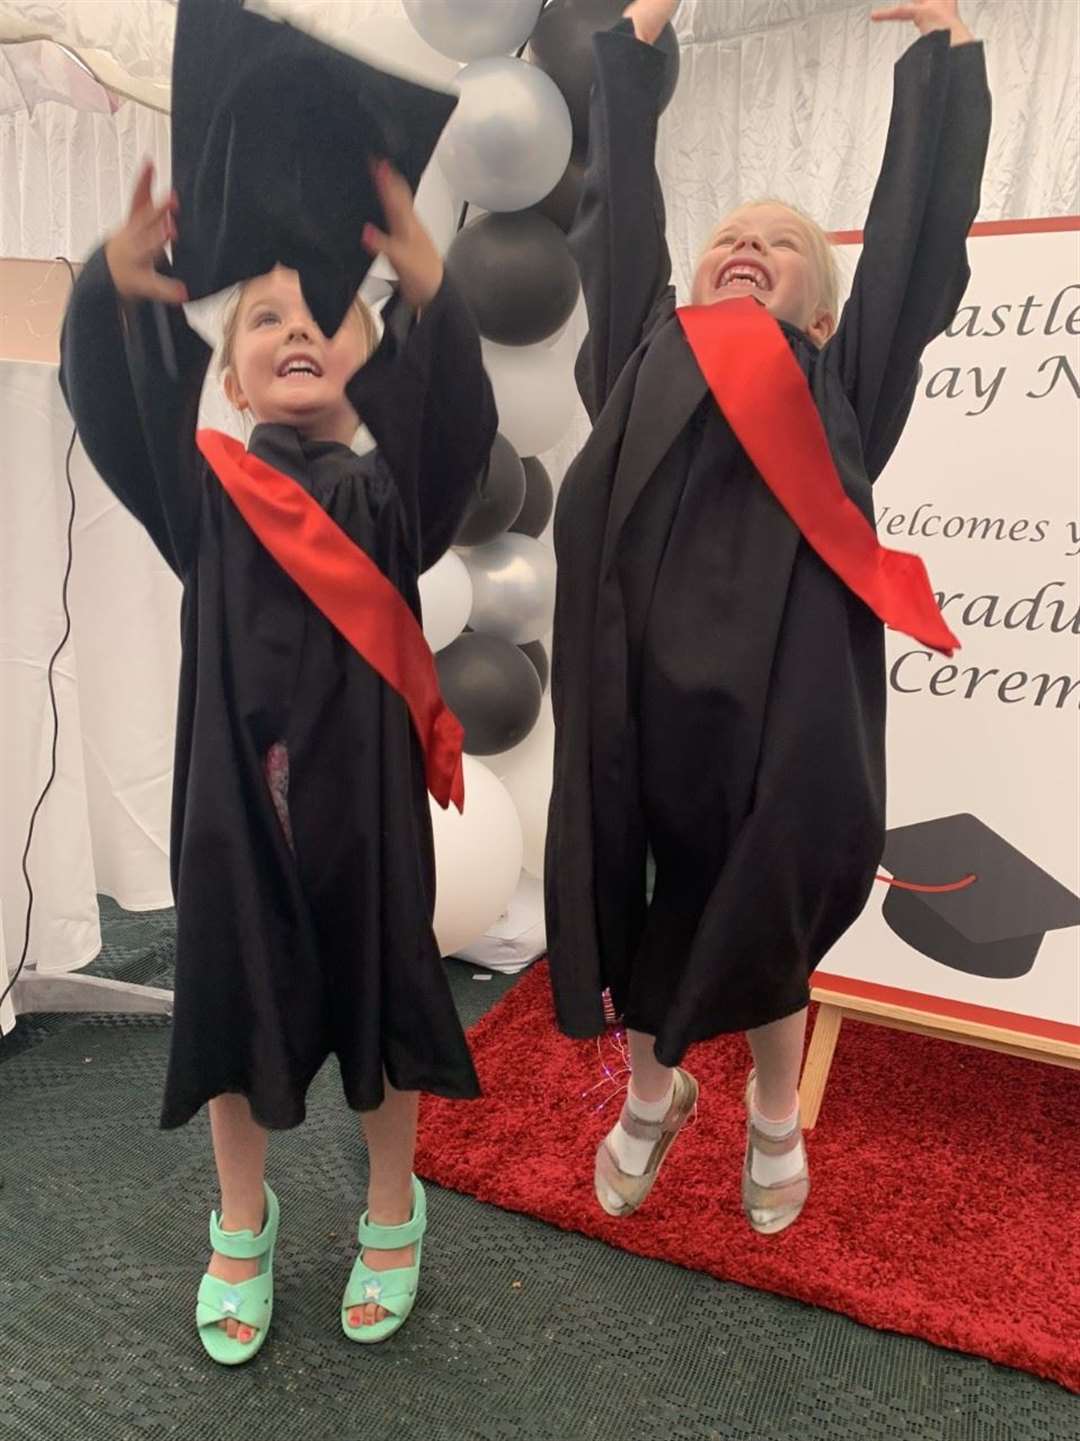 Marlowe and Poppy throwing their graduation caps